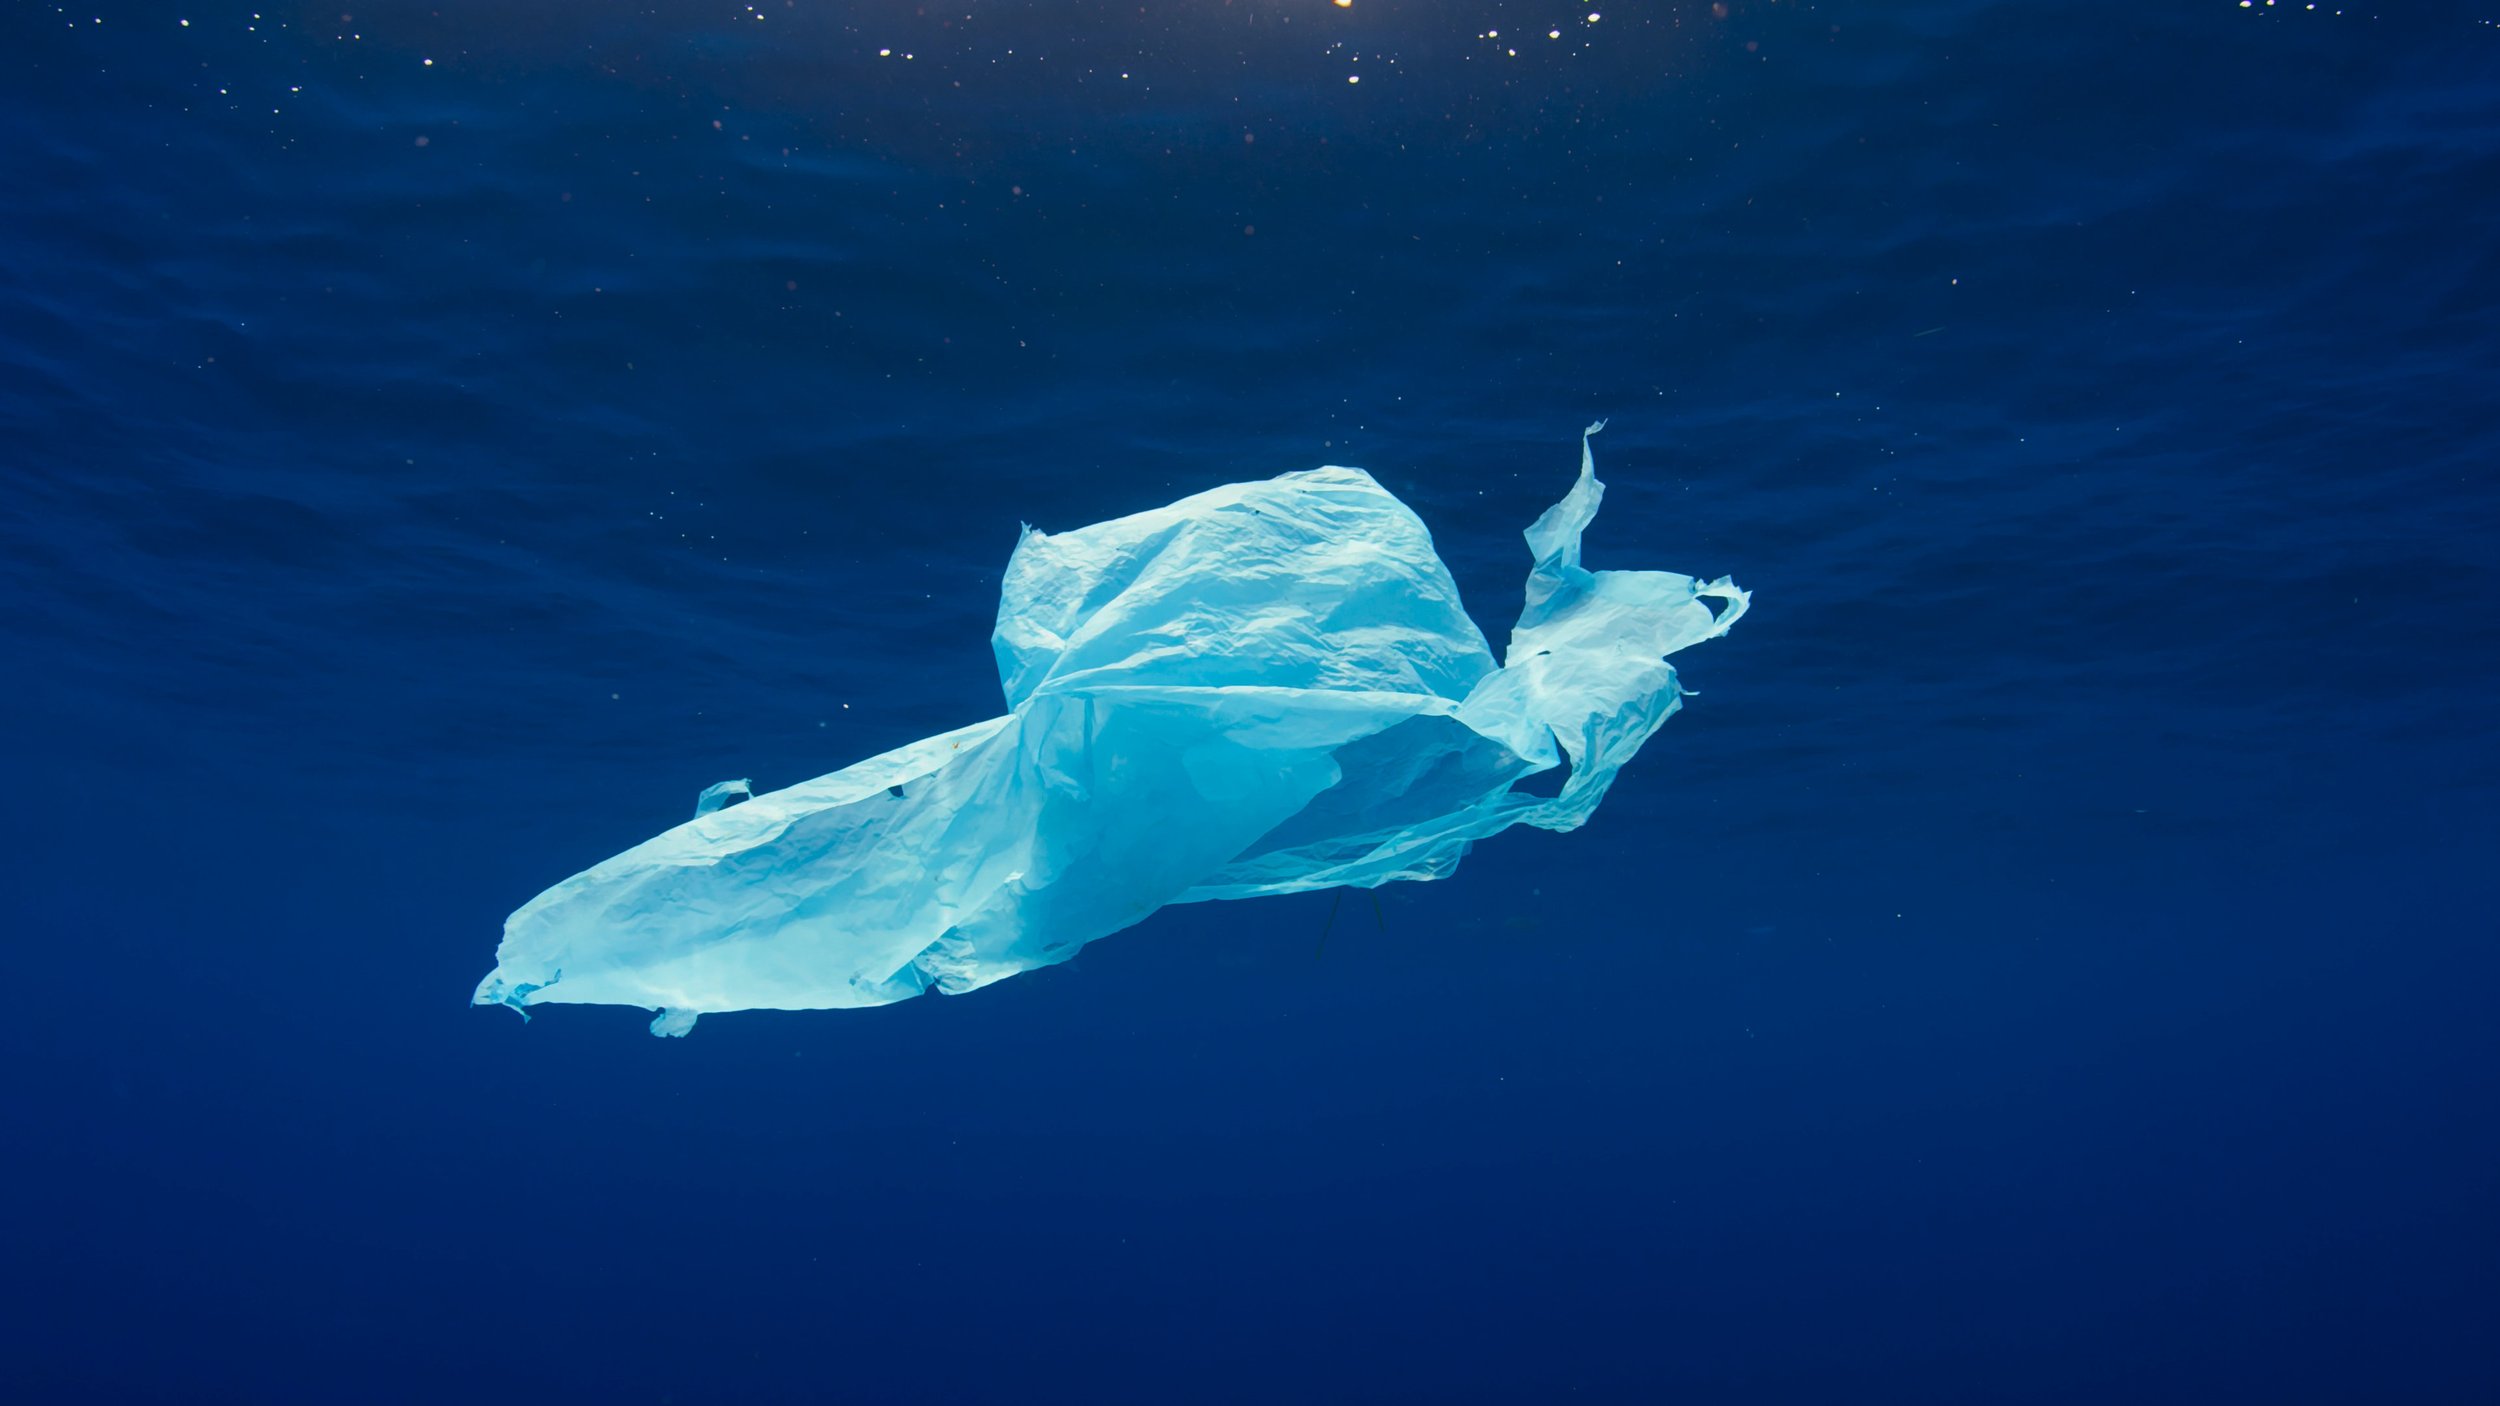 What's the Right Way to Recycle Plastic Bags and Wraps (AKA Plastic Film  Packaging)? - America's Plastic Makers